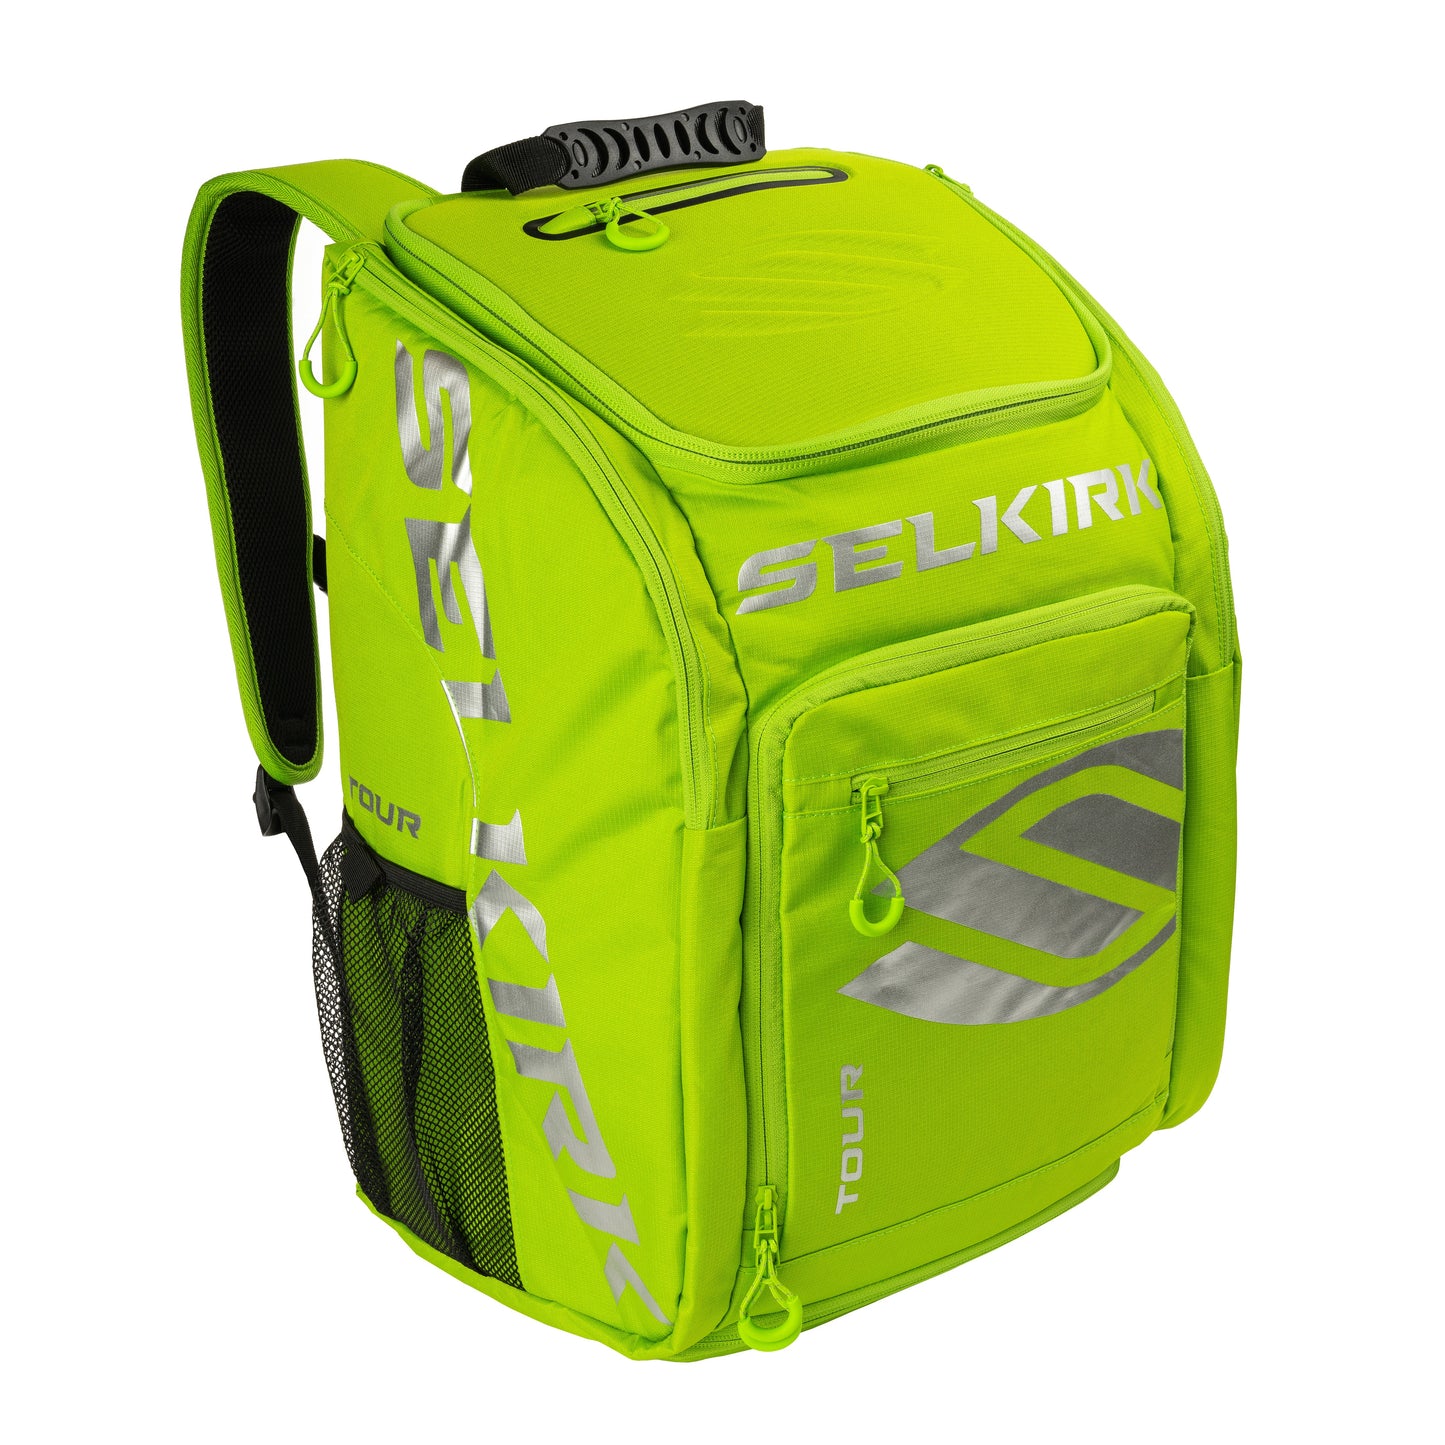 A Selkirk Core Series Tour Backpack Pickleball Bag with a logo on it.